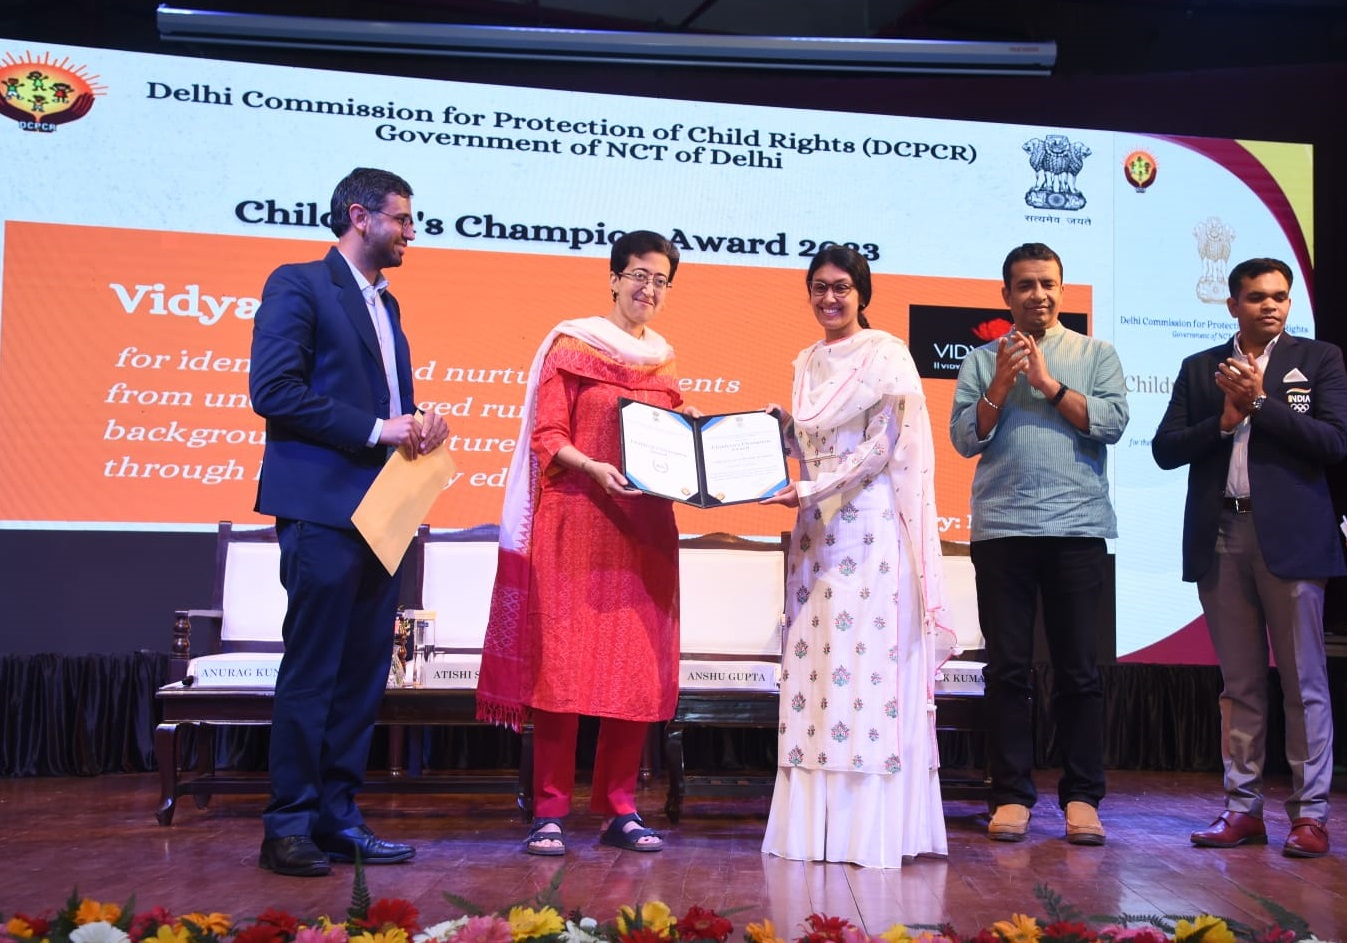 SNF’s VidyaGyan Initiative Recognized With The ‘Children’s Champion Award’